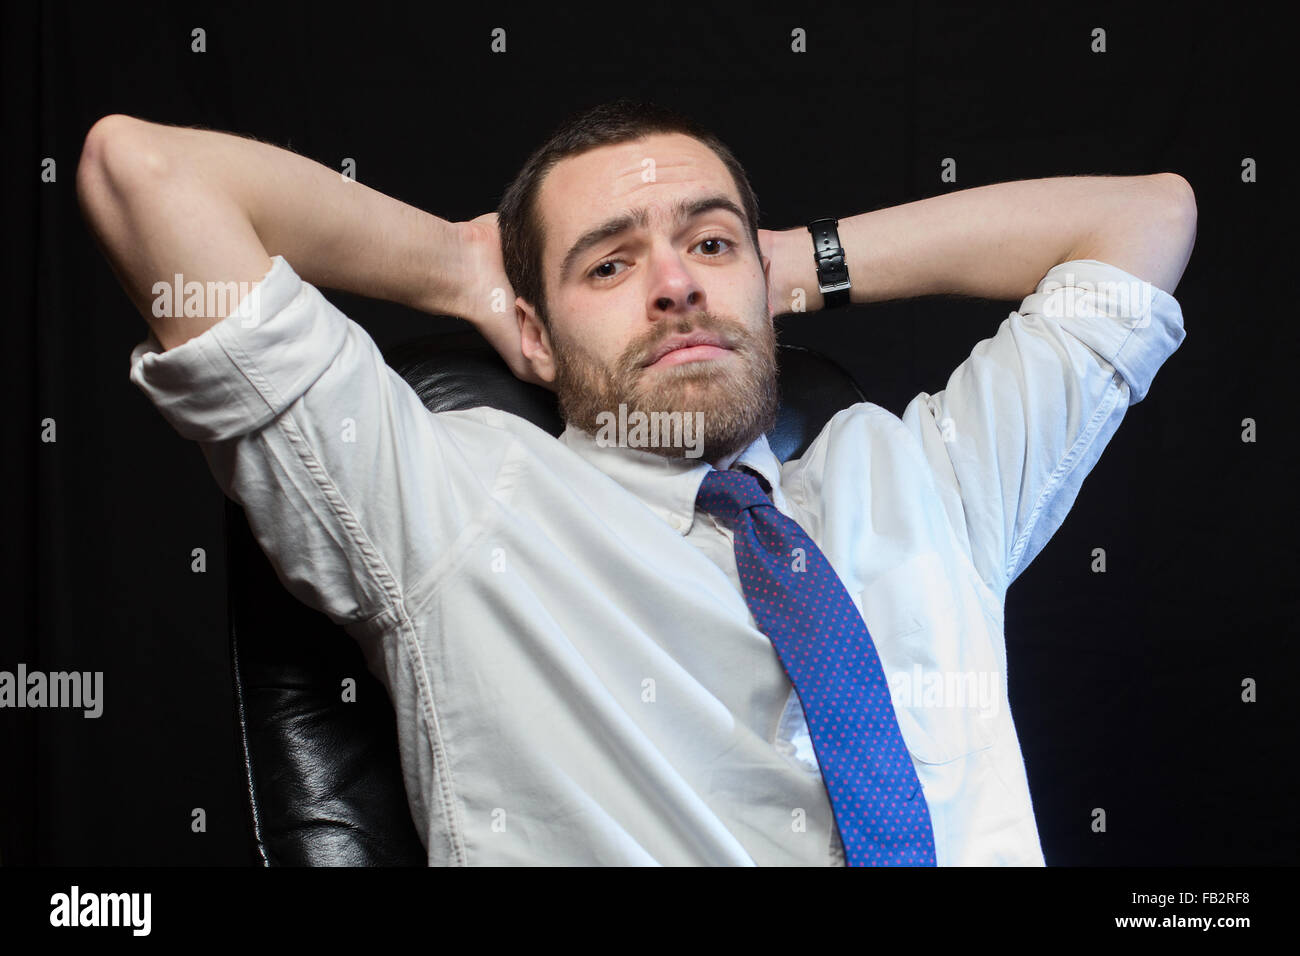 An office worker, wearing a shirt and tie, relaxes in a chair. Stock Photo